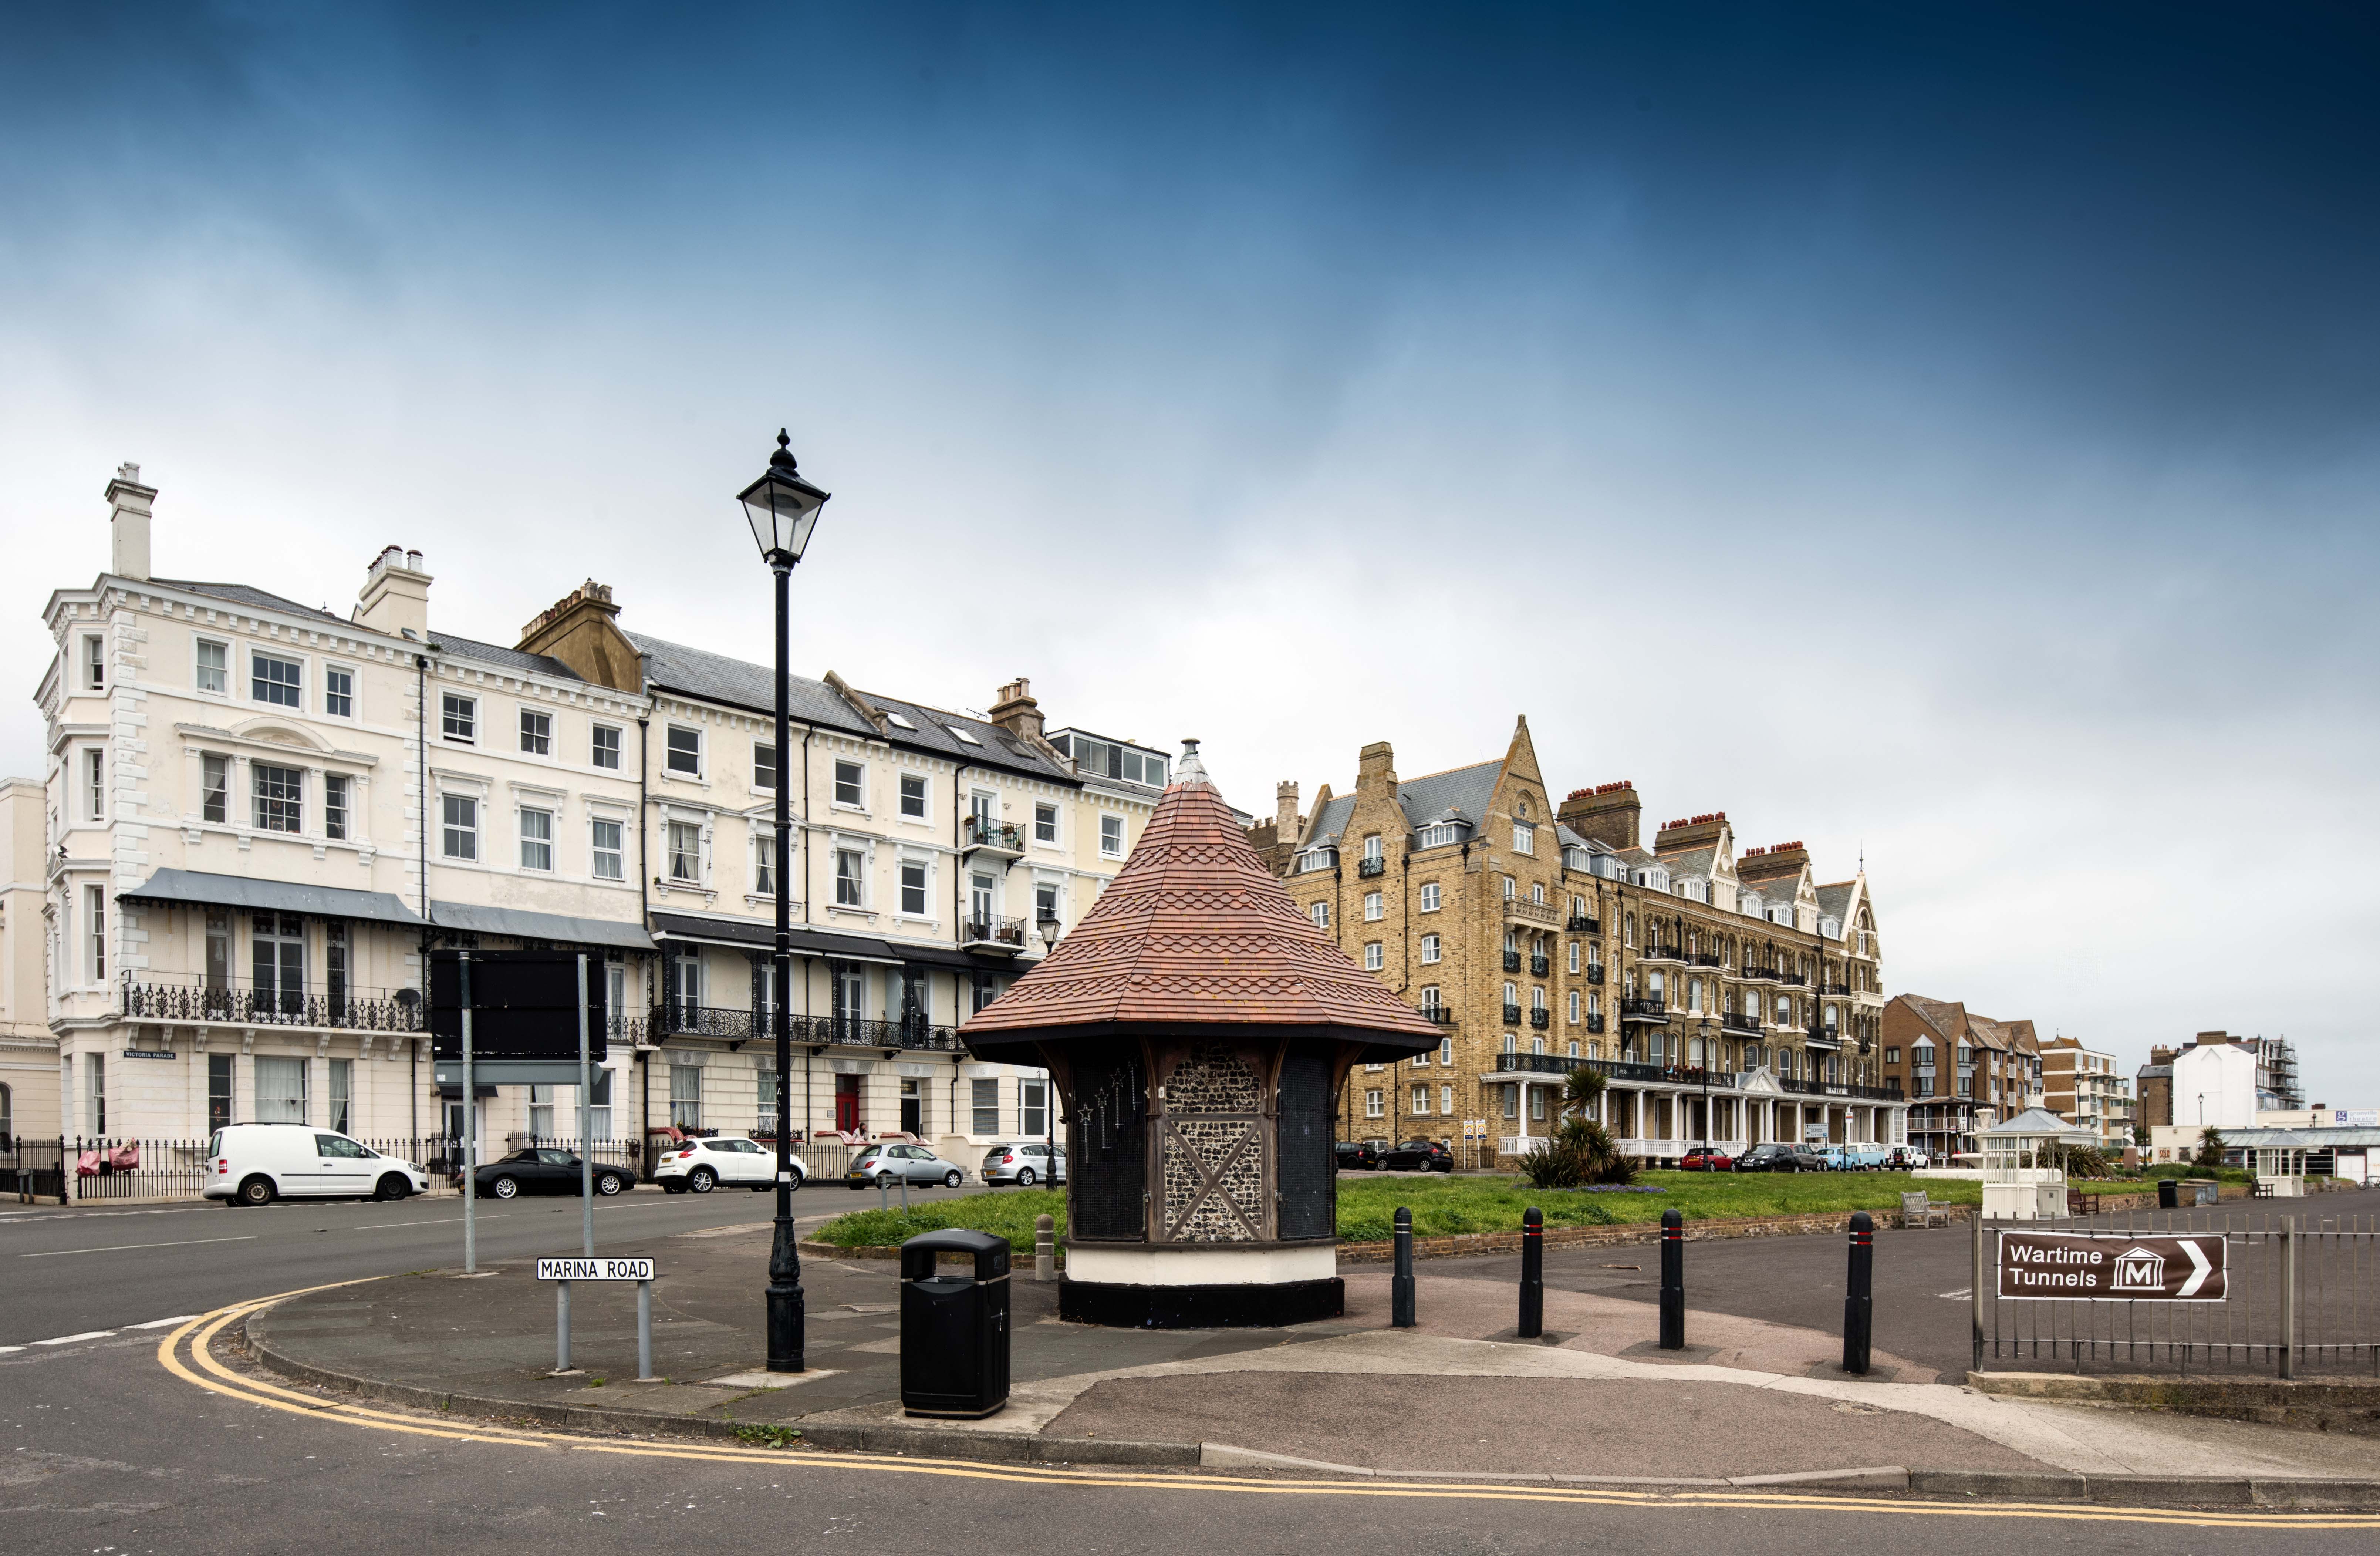 Timber framed octagonal kiosk on Ramsgate seafront with terrace of buildings in the background